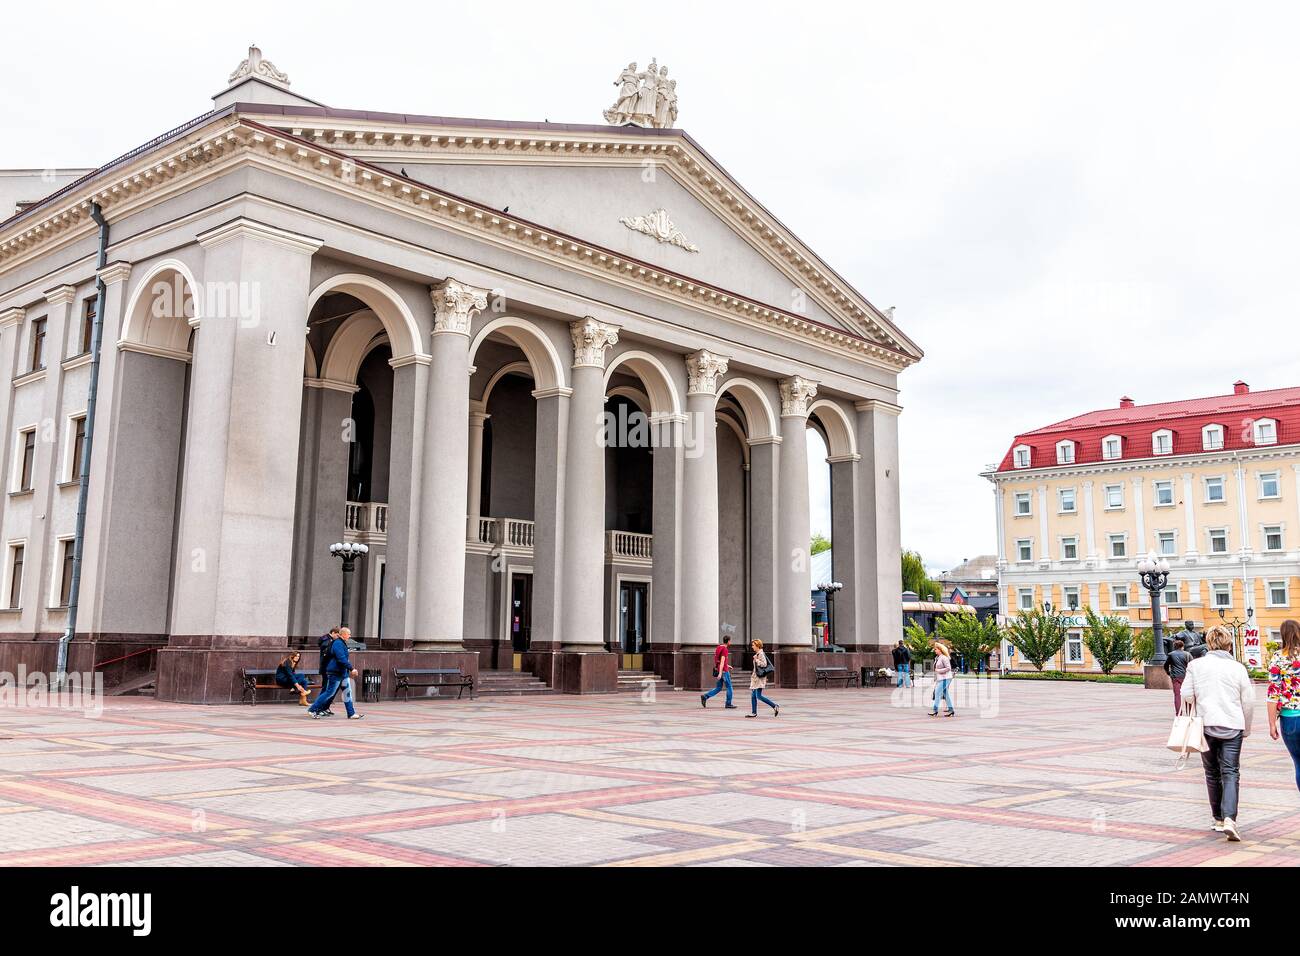 Rivne, Ukraine - July 3, 2018: Main square with theater Rovno Soviet architecture city in western Ukraine outdoor park in summer and people walking Stock Photo